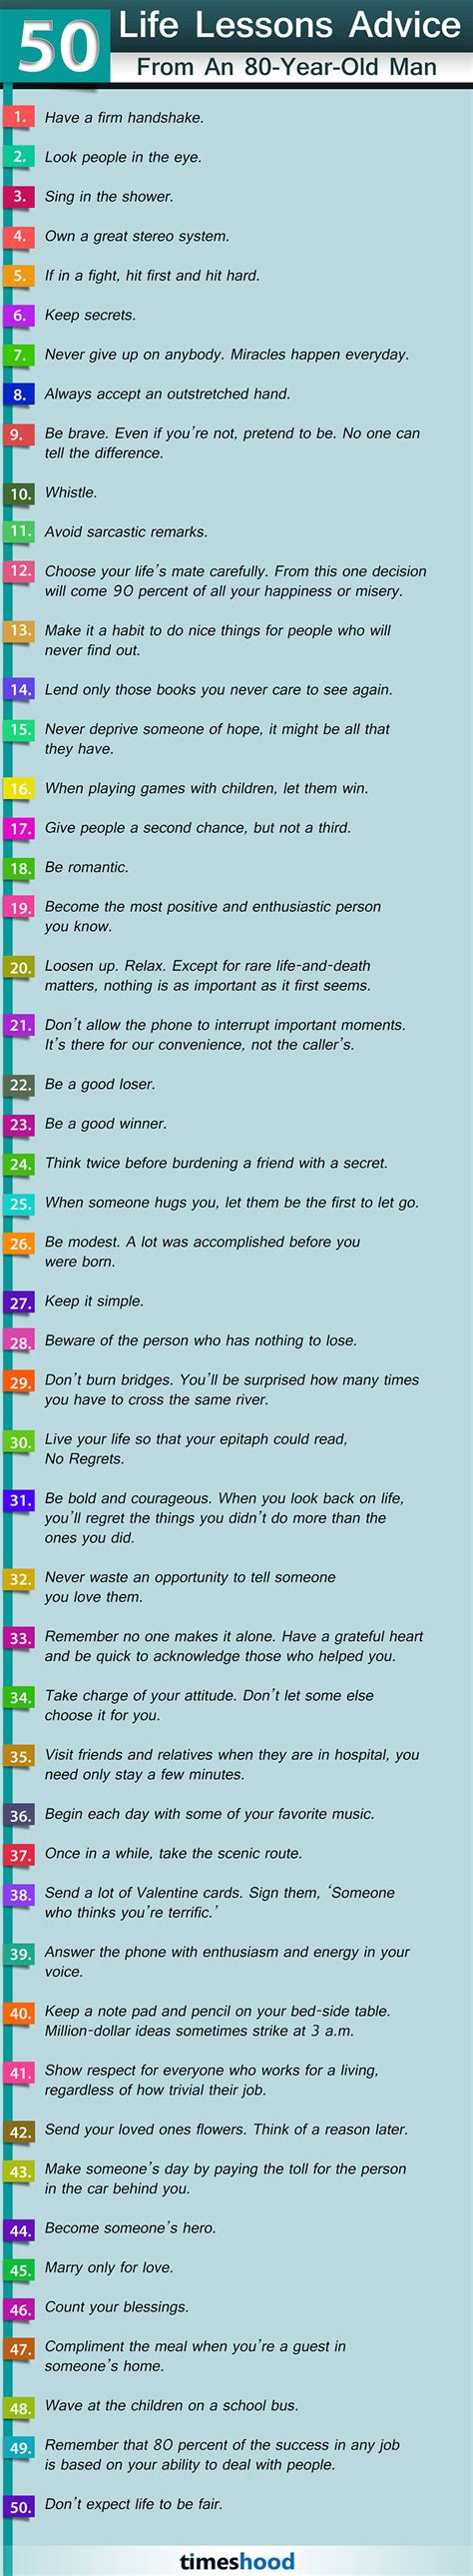 Learn 50 Best Life Advice From An 80 Year Old Man Infographic